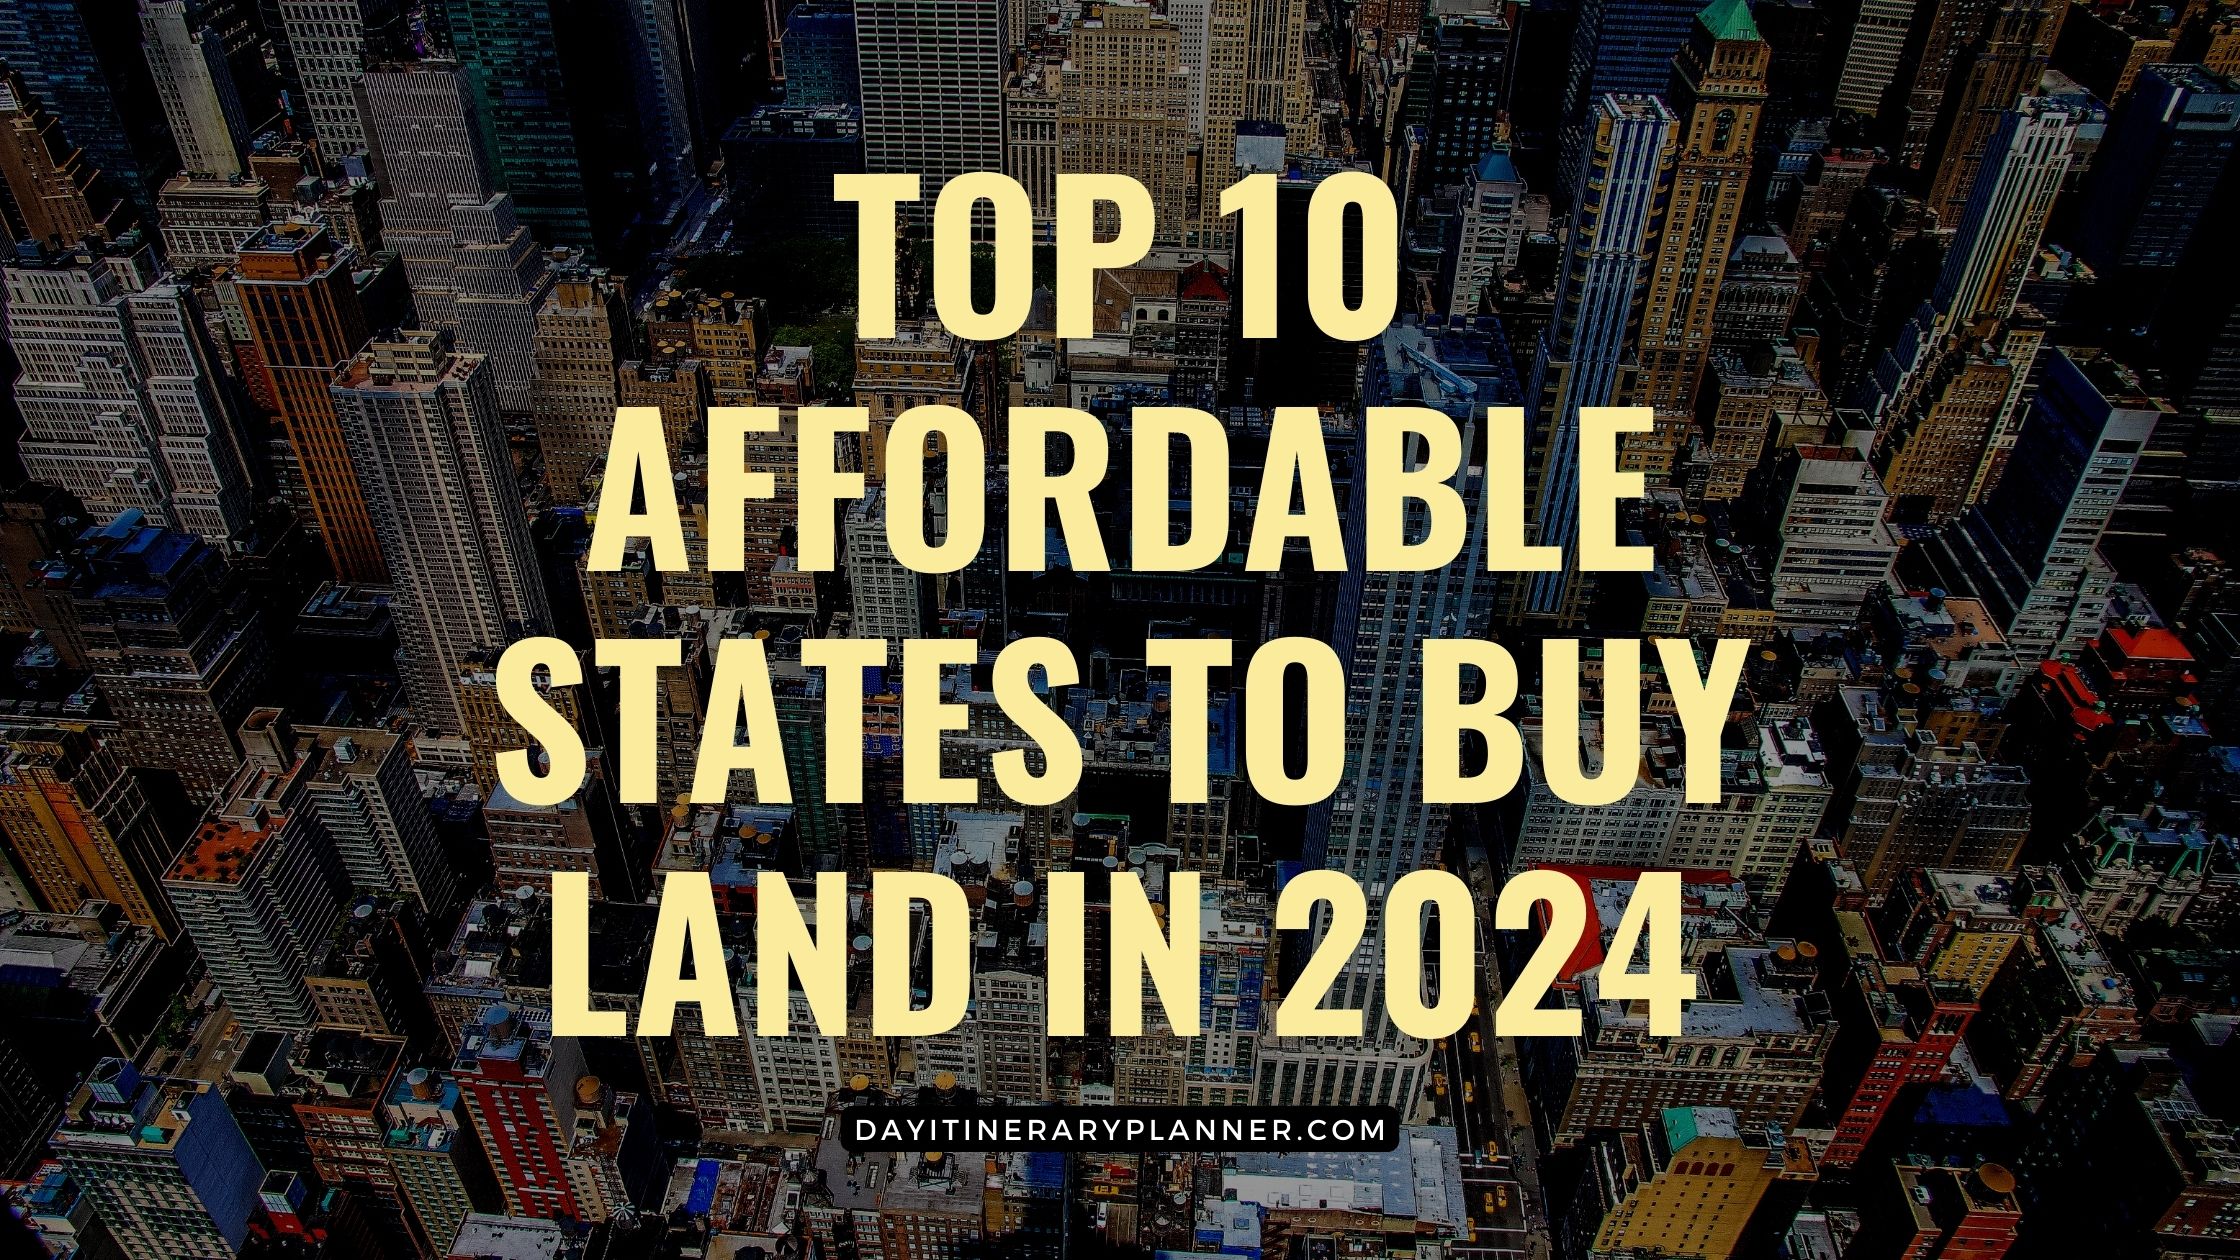 Top-10-Affordable-States-to-Buy-Land-in-2024